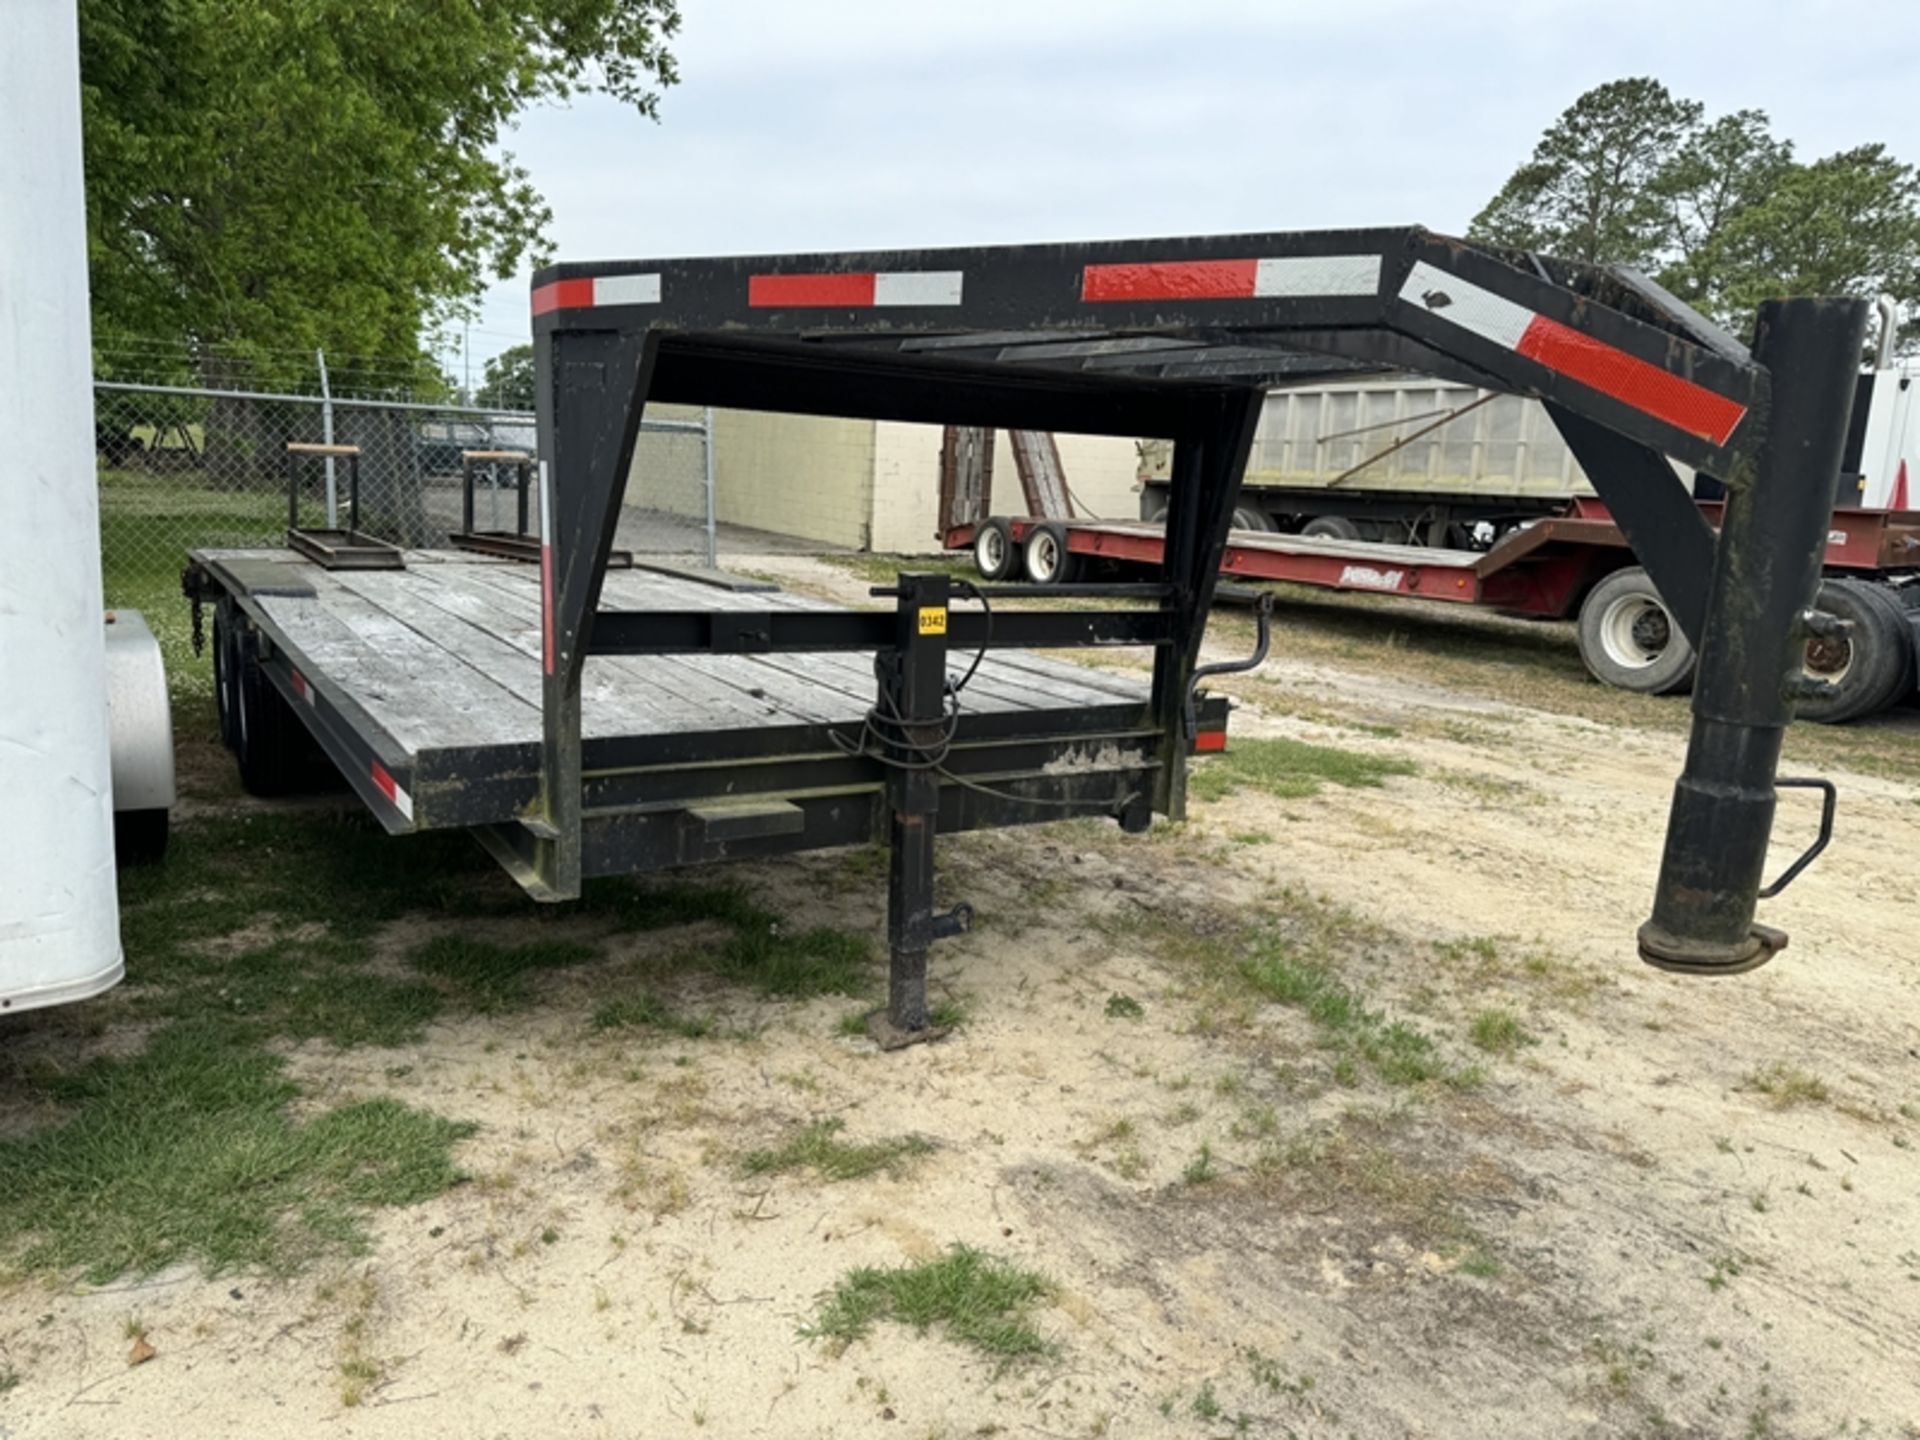 20’ gooseneck equipment trailer with ramps - NO TITLE - NCX01031430 - Image 2 of 4